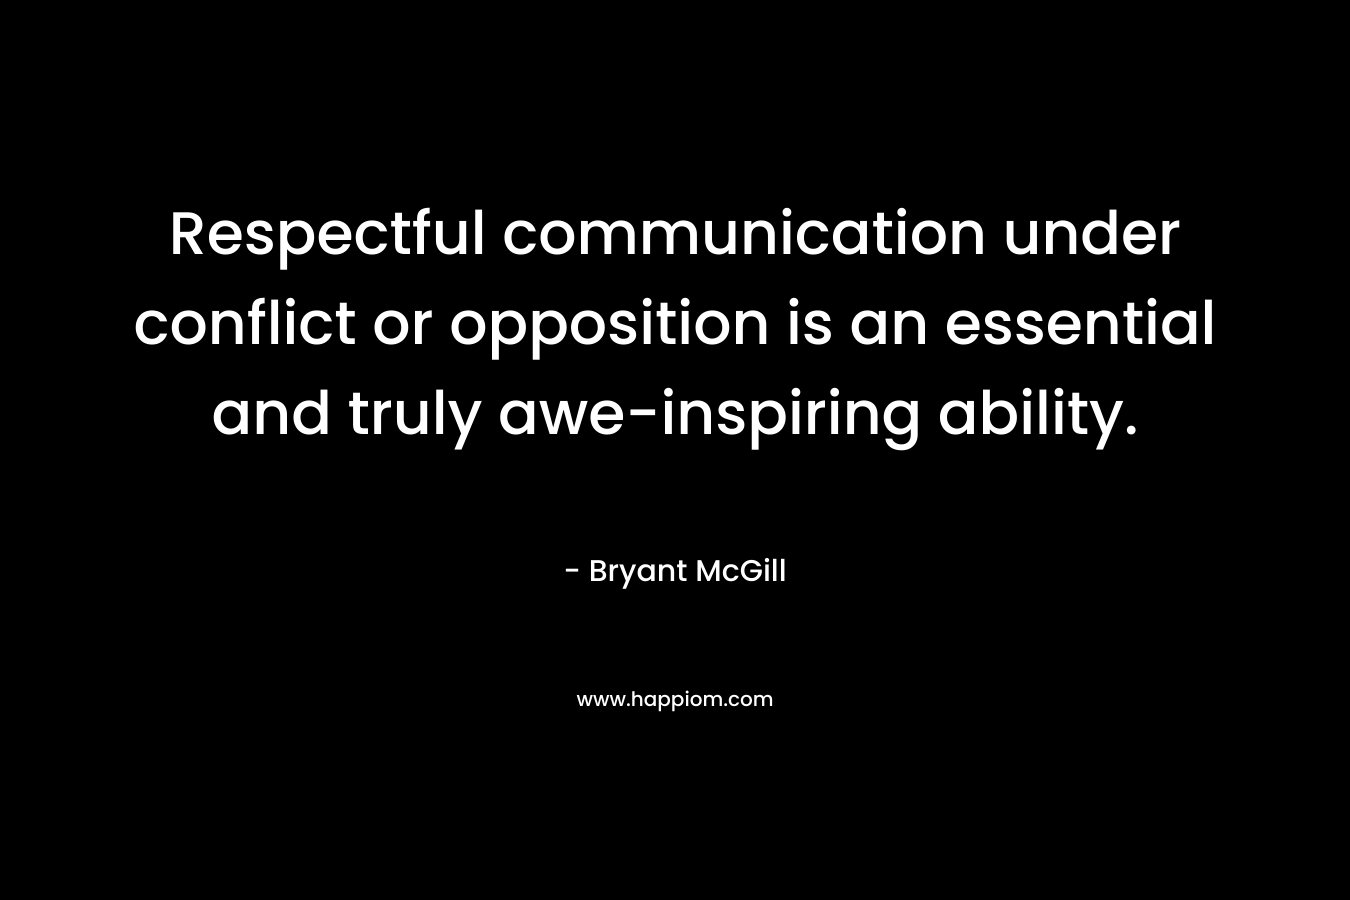 Respectful communication under conflict or opposition is an essential and truly awe-inspiring ability. – Bryant McGill